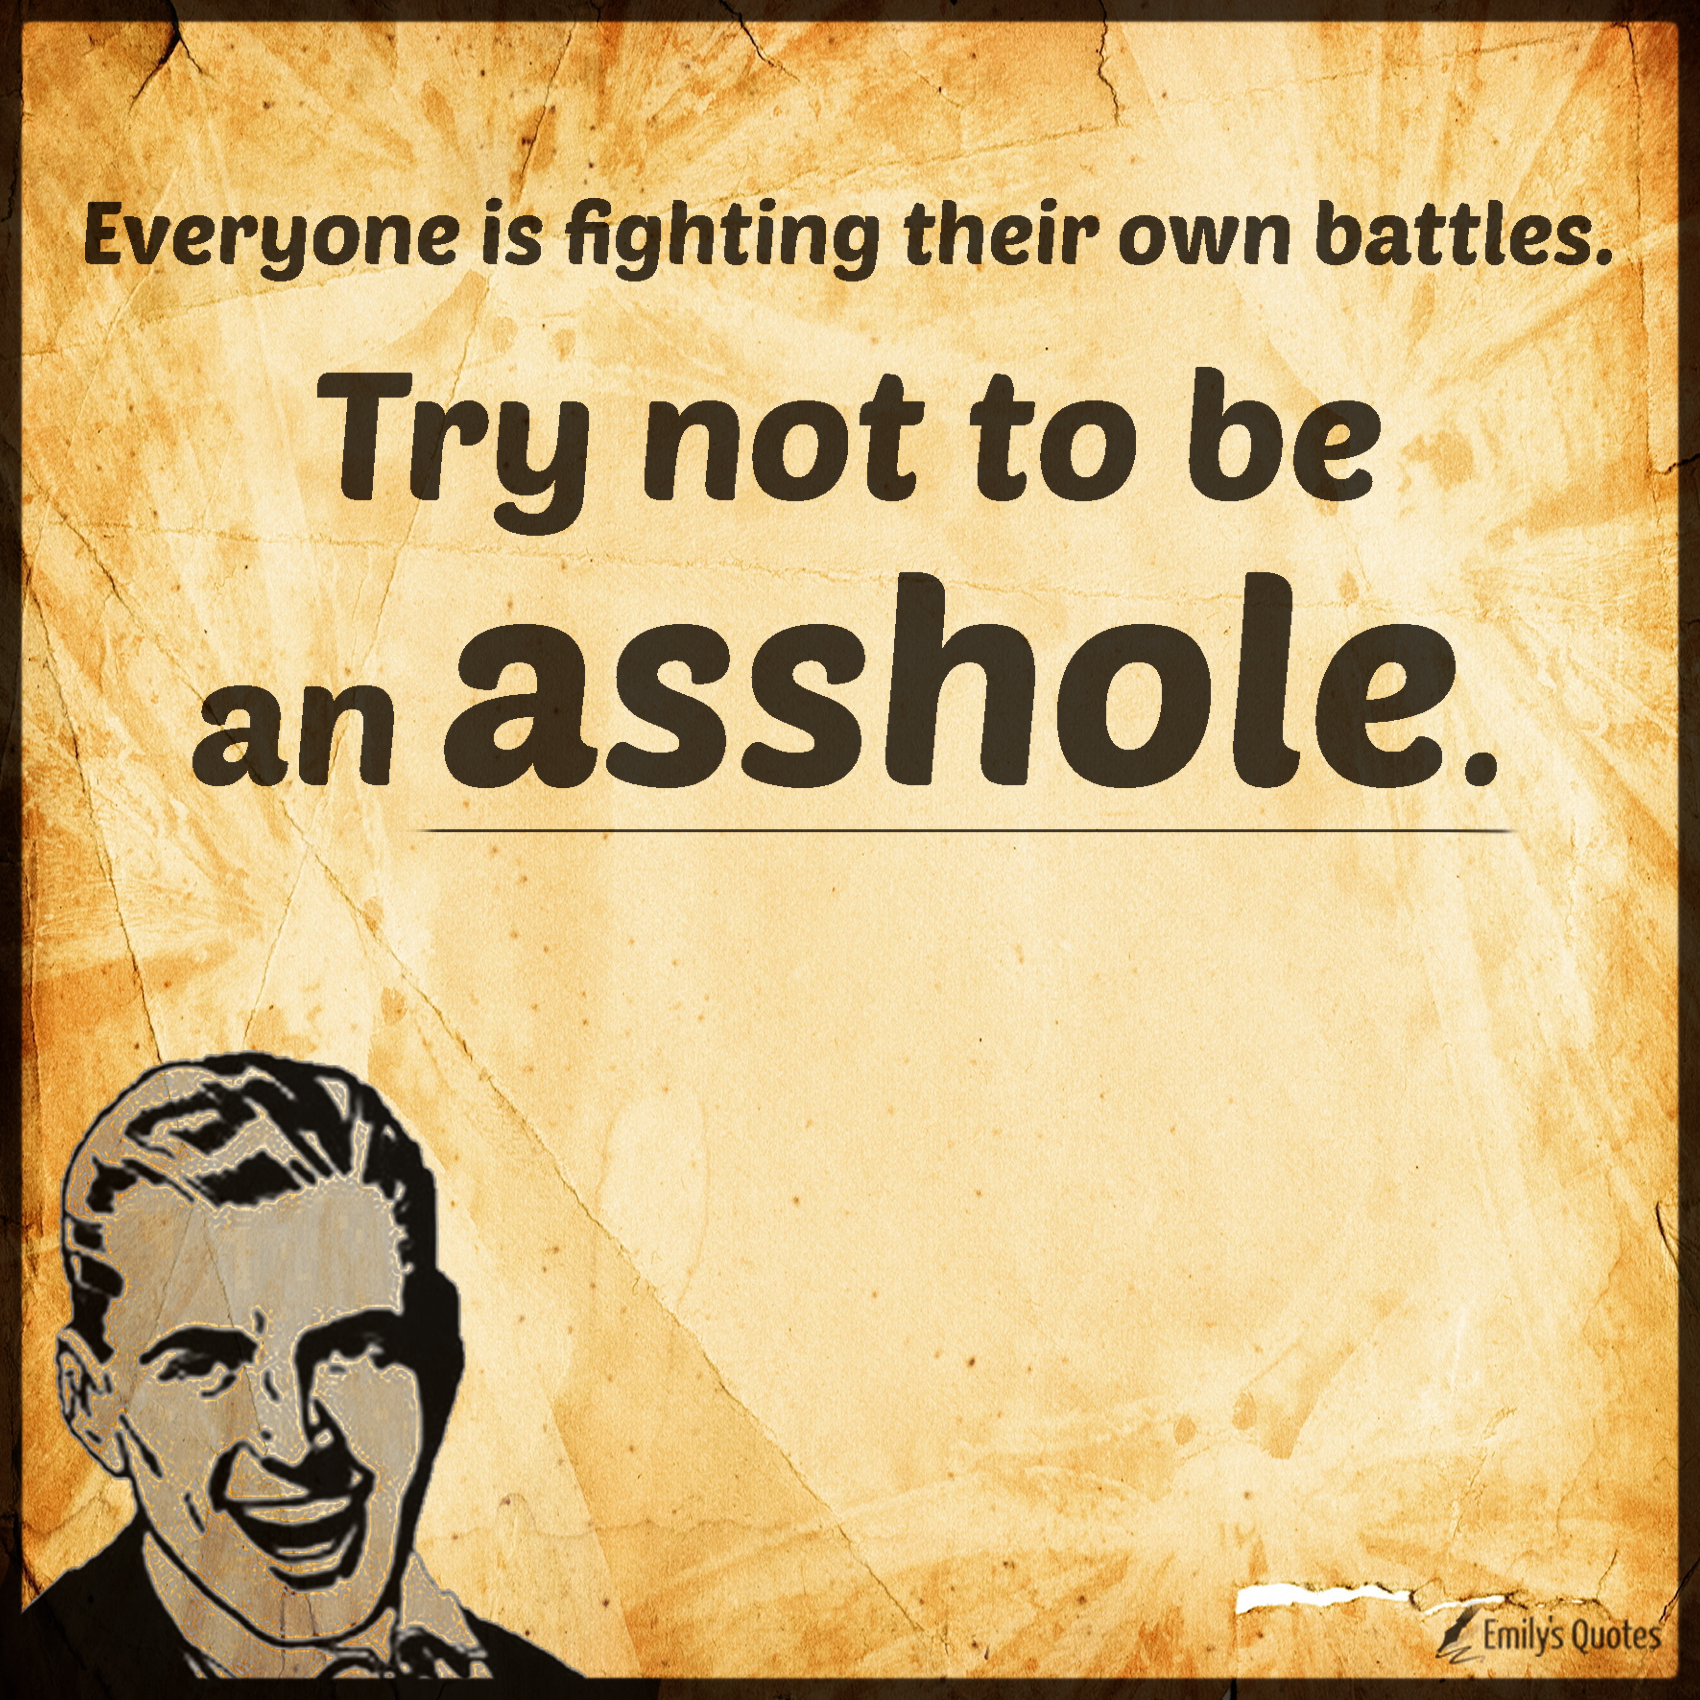 Everyone is fighting their own battles. Try not to be an asshole